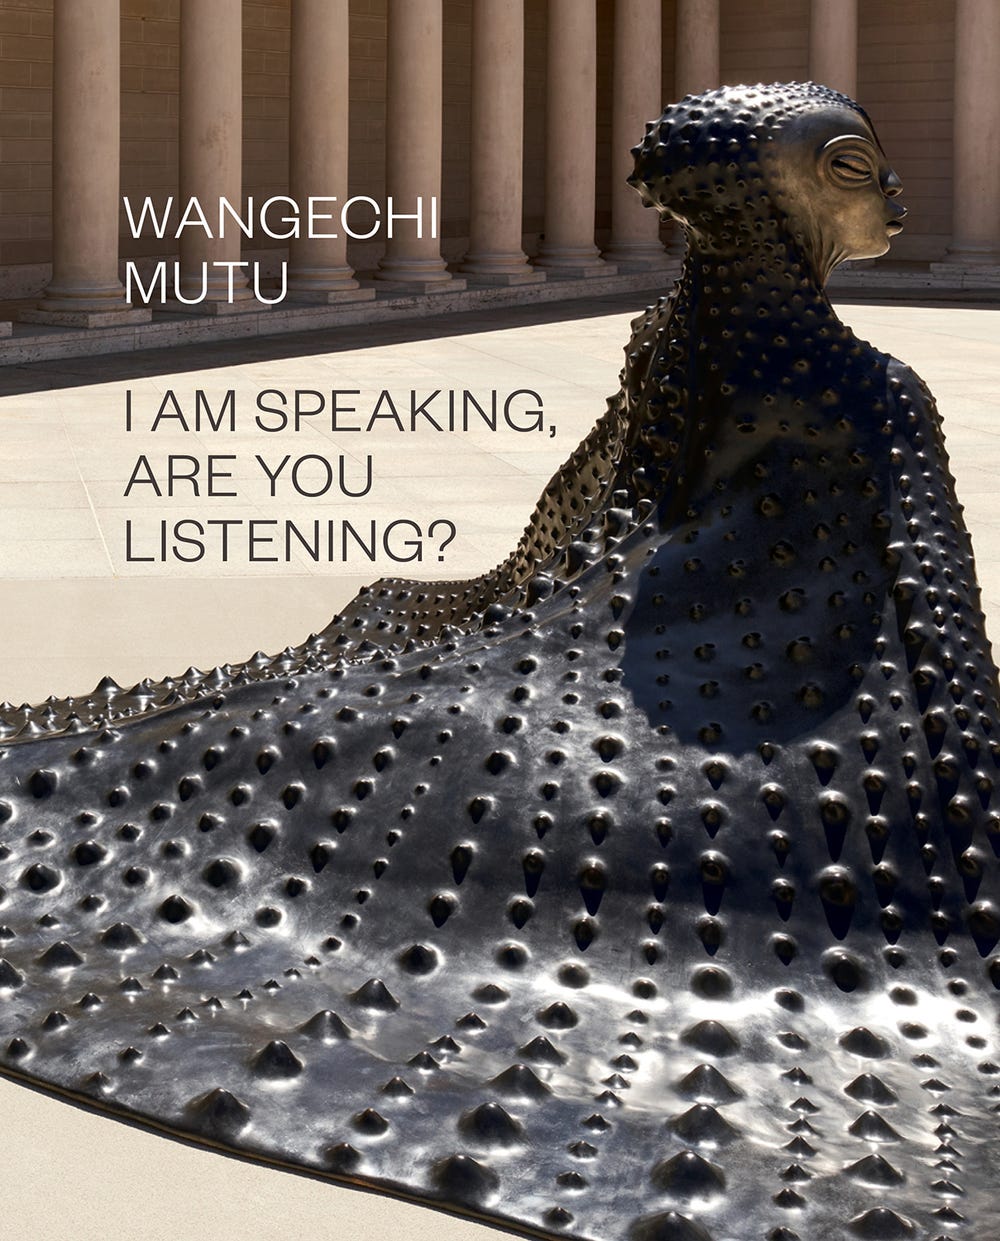 Book jacket featuring textured sculpture with "Wangechu Mutu I Am Speaking, Are You Listening?" text